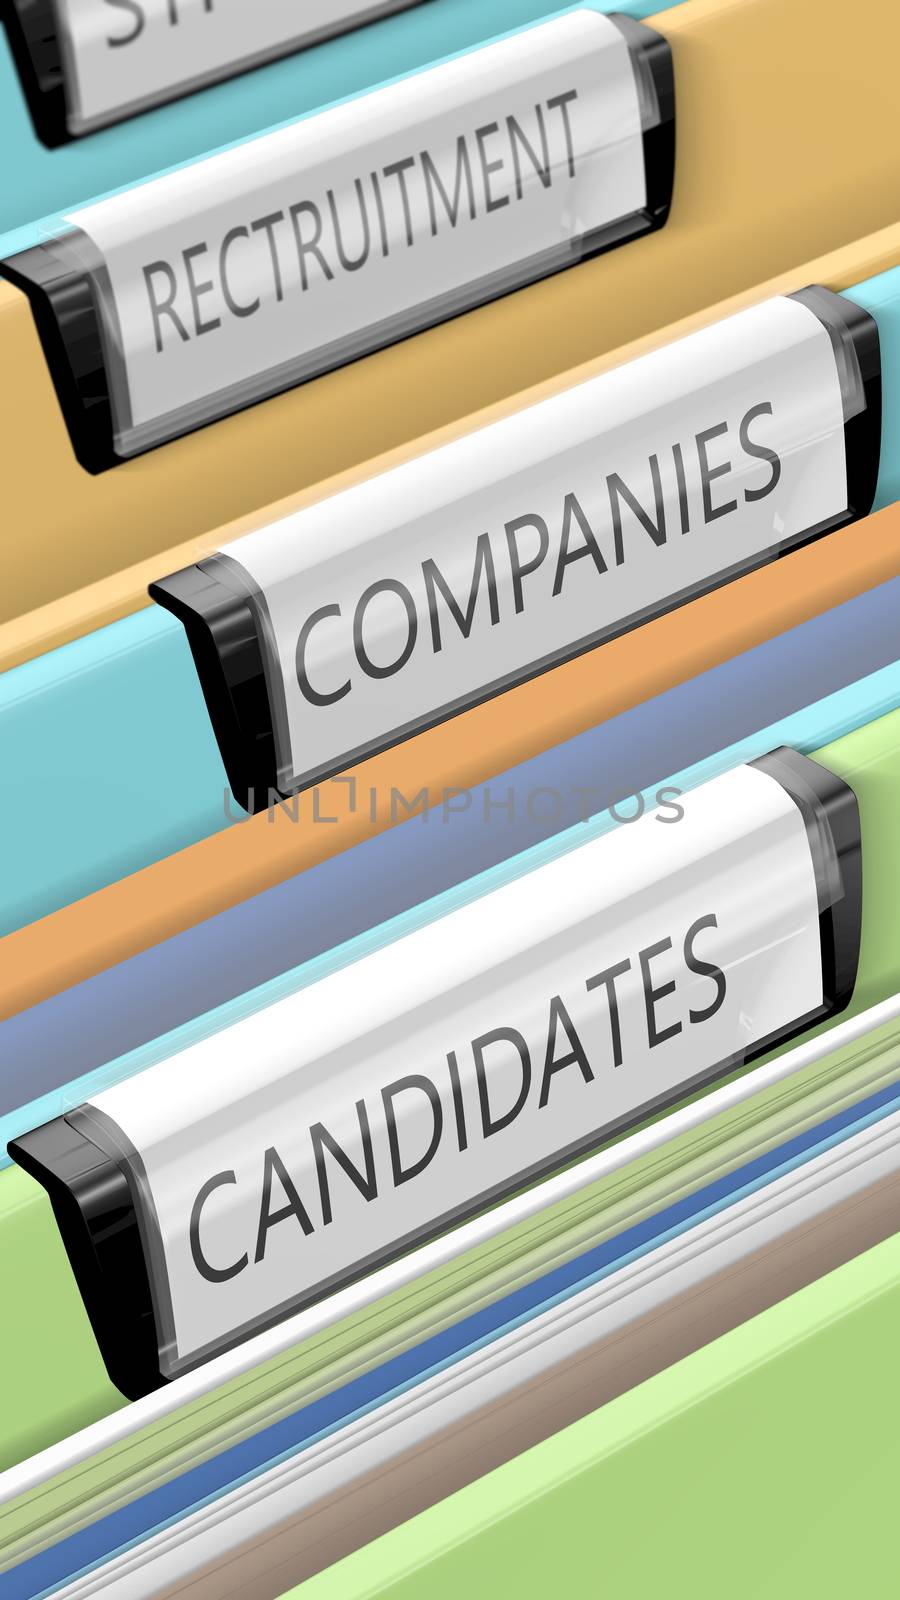 Files on candidates and company positions by ytjo